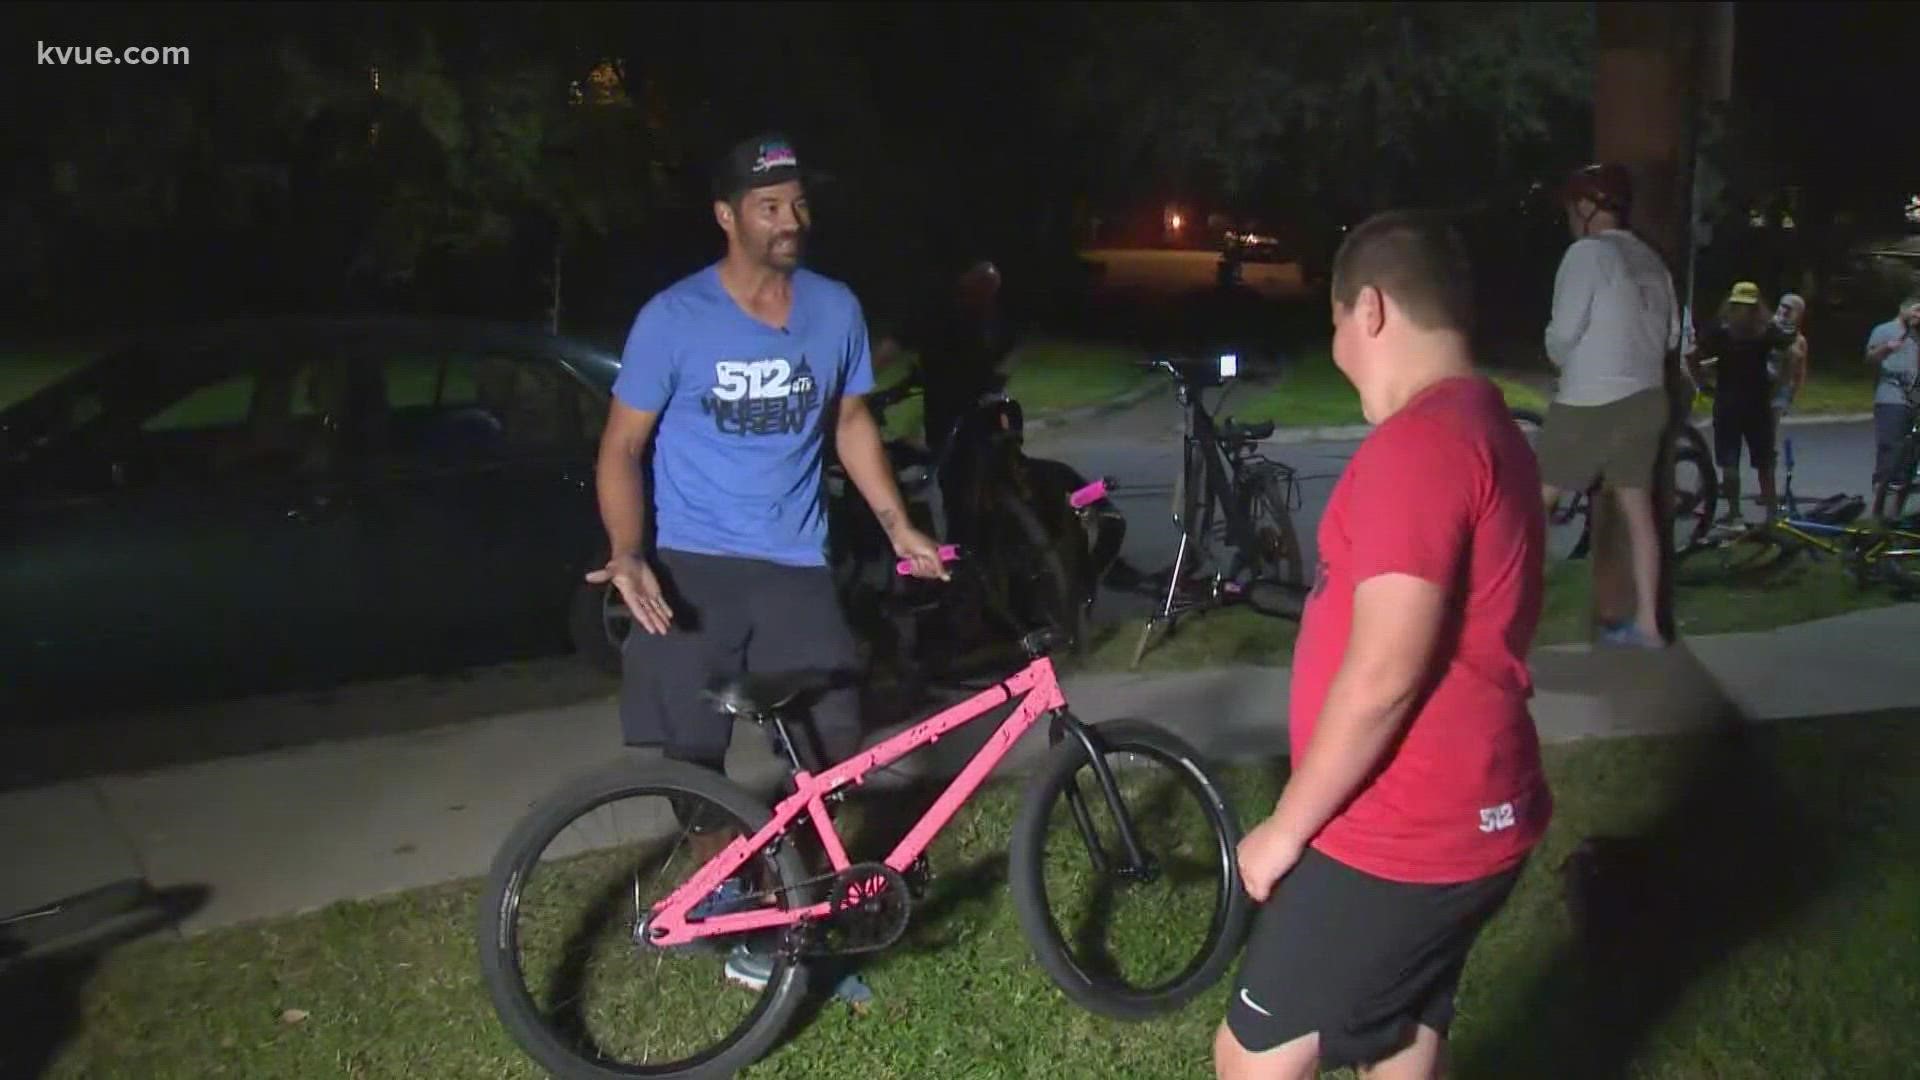 The 512 Wheelie Crew takes to the streets of Downtown Austin every week for a 16-mile joy ride. They are also heavily involved in the community.